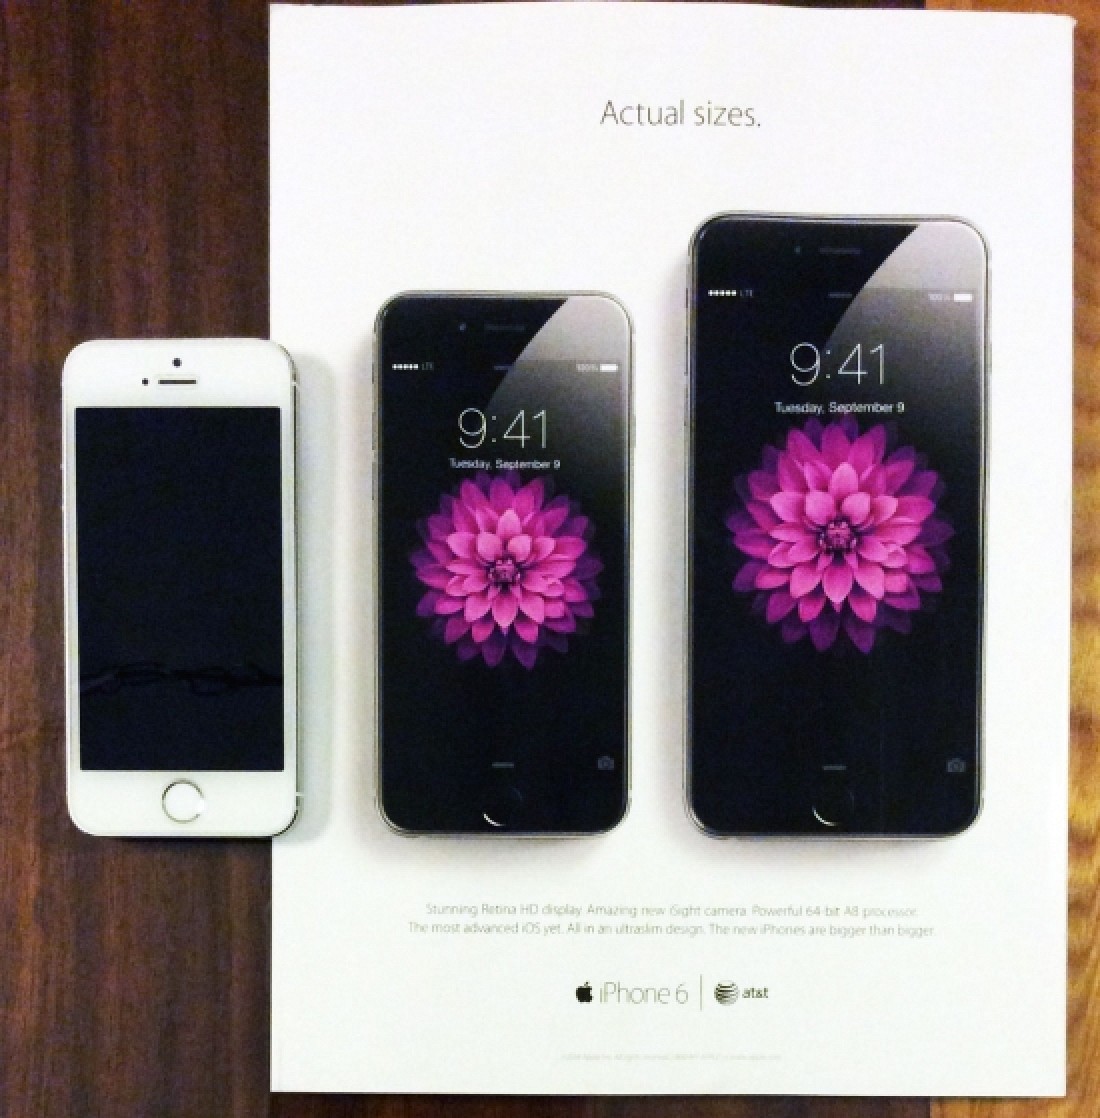 New Apple Print Ad Shows Off iPhone 6 and 6 Plus 'Actual ...